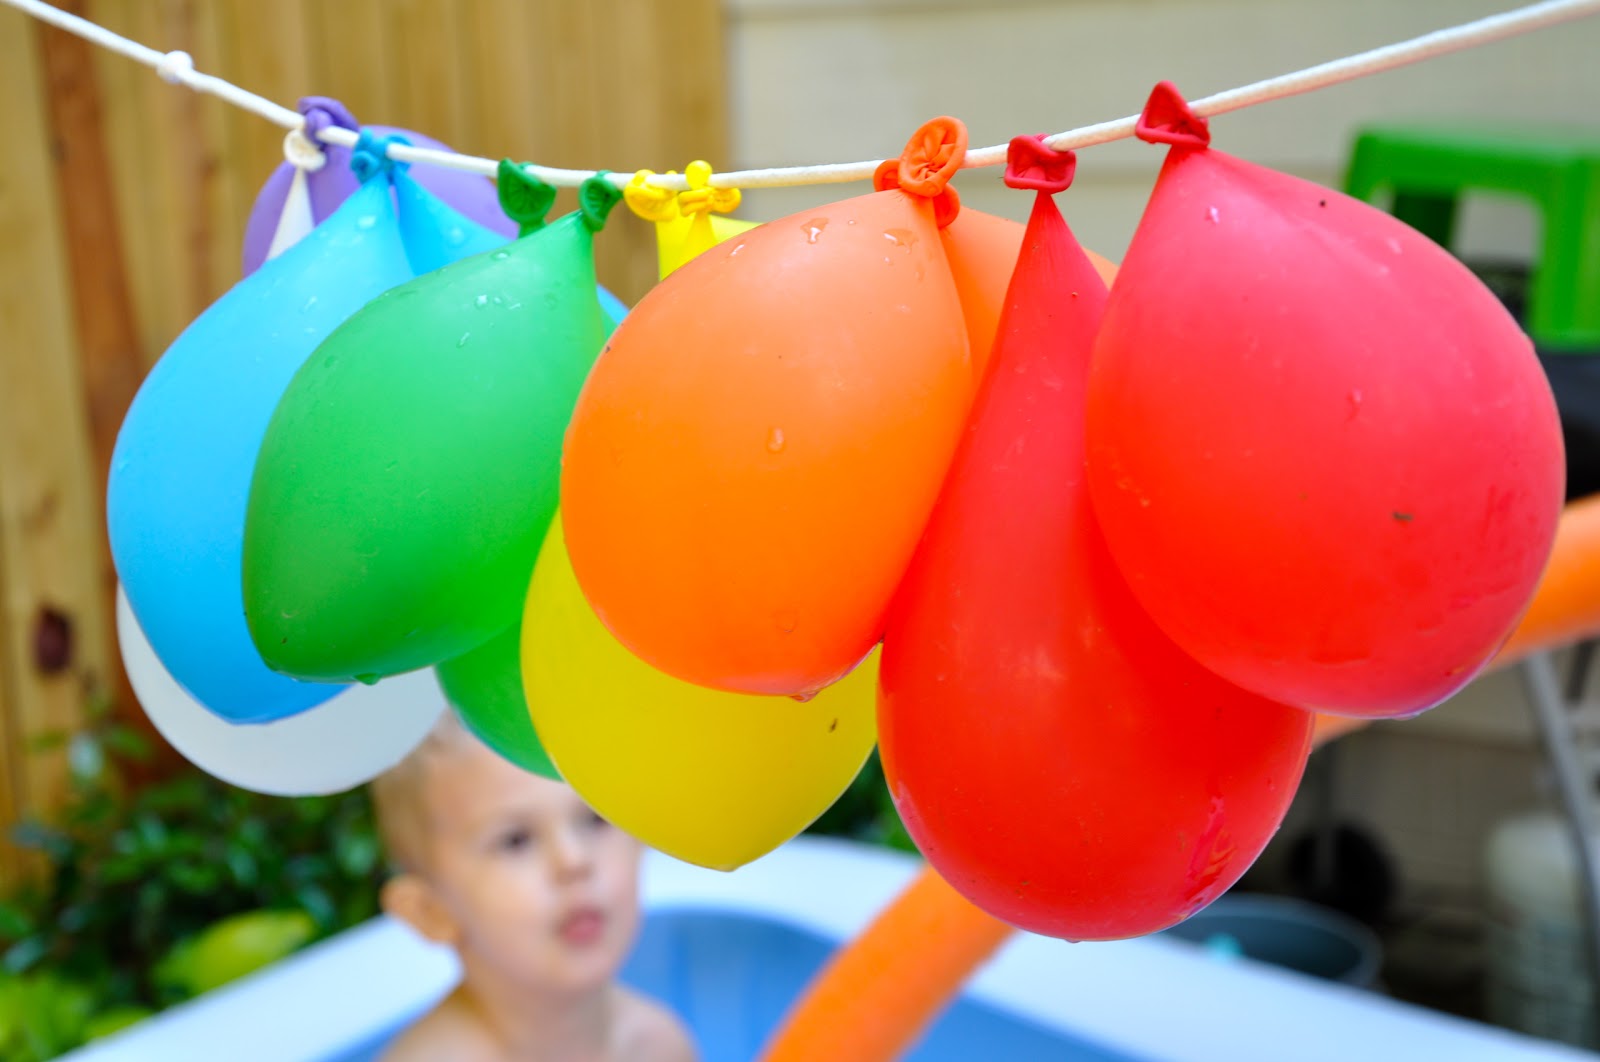 water ballons hanging on a string